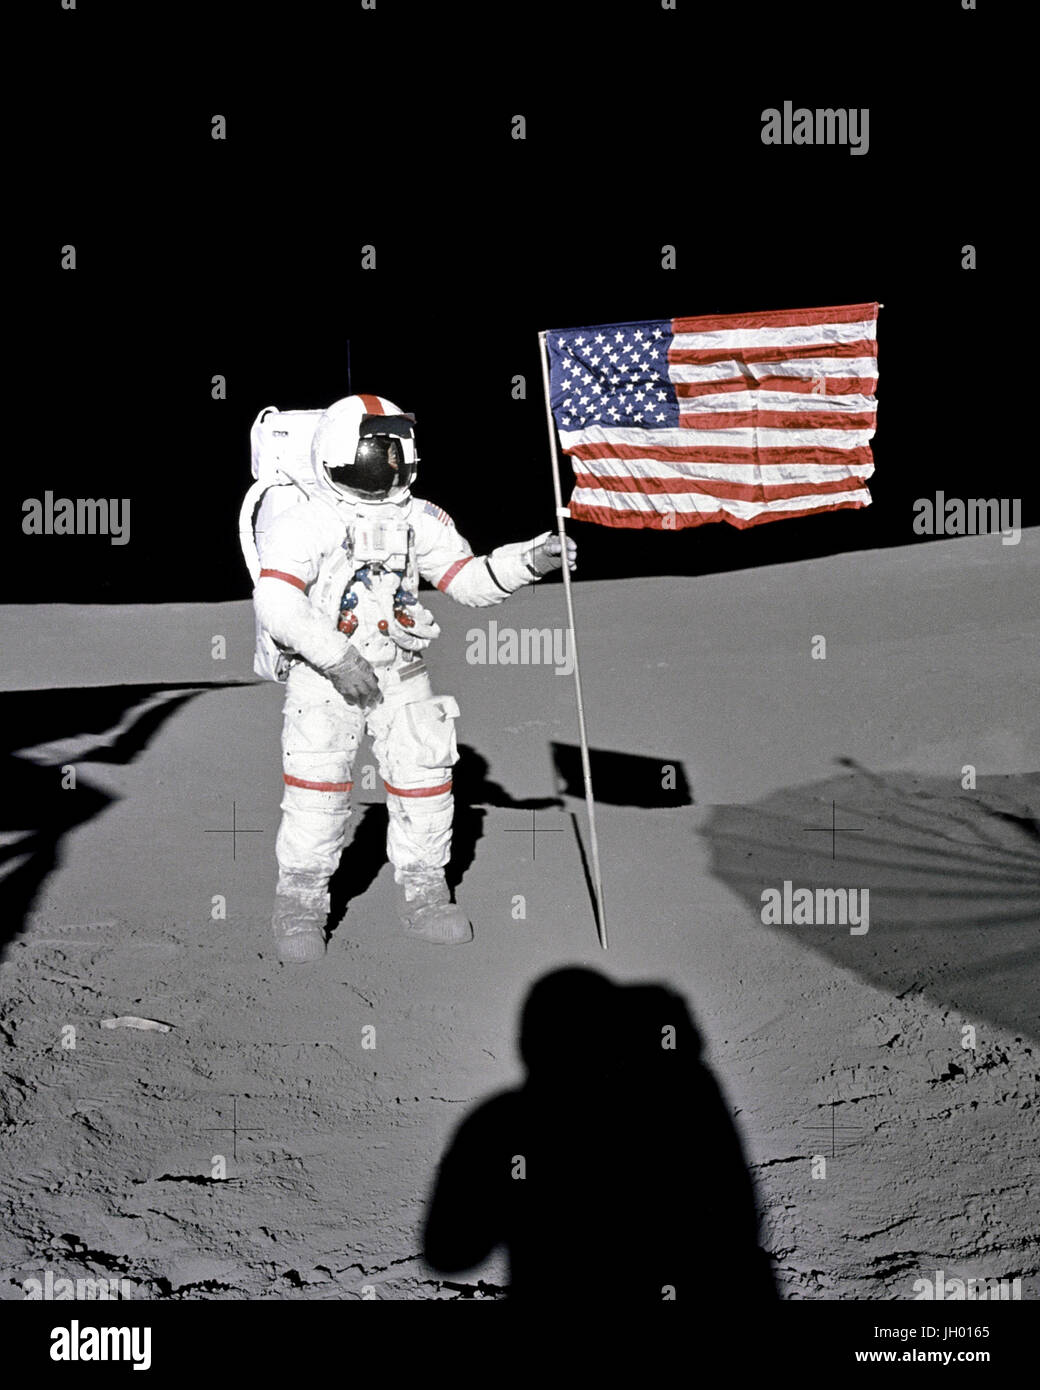 Astronaut Alan B. Shepard Jr., Apollo 14 Commander, stands by the U.S. flag on the lunar Fra Mauro Highlands during the early moments of the first extravehicular activity (EVA-1) of the mission. Shadows of the Lunar Module 'Antares', astronaut Edgar D. Mitchell, Lunar Module pilot, and the erectable S-band Antenna surround the scene of the third American flag planting to be performed on the lunar surface. Stock Photo